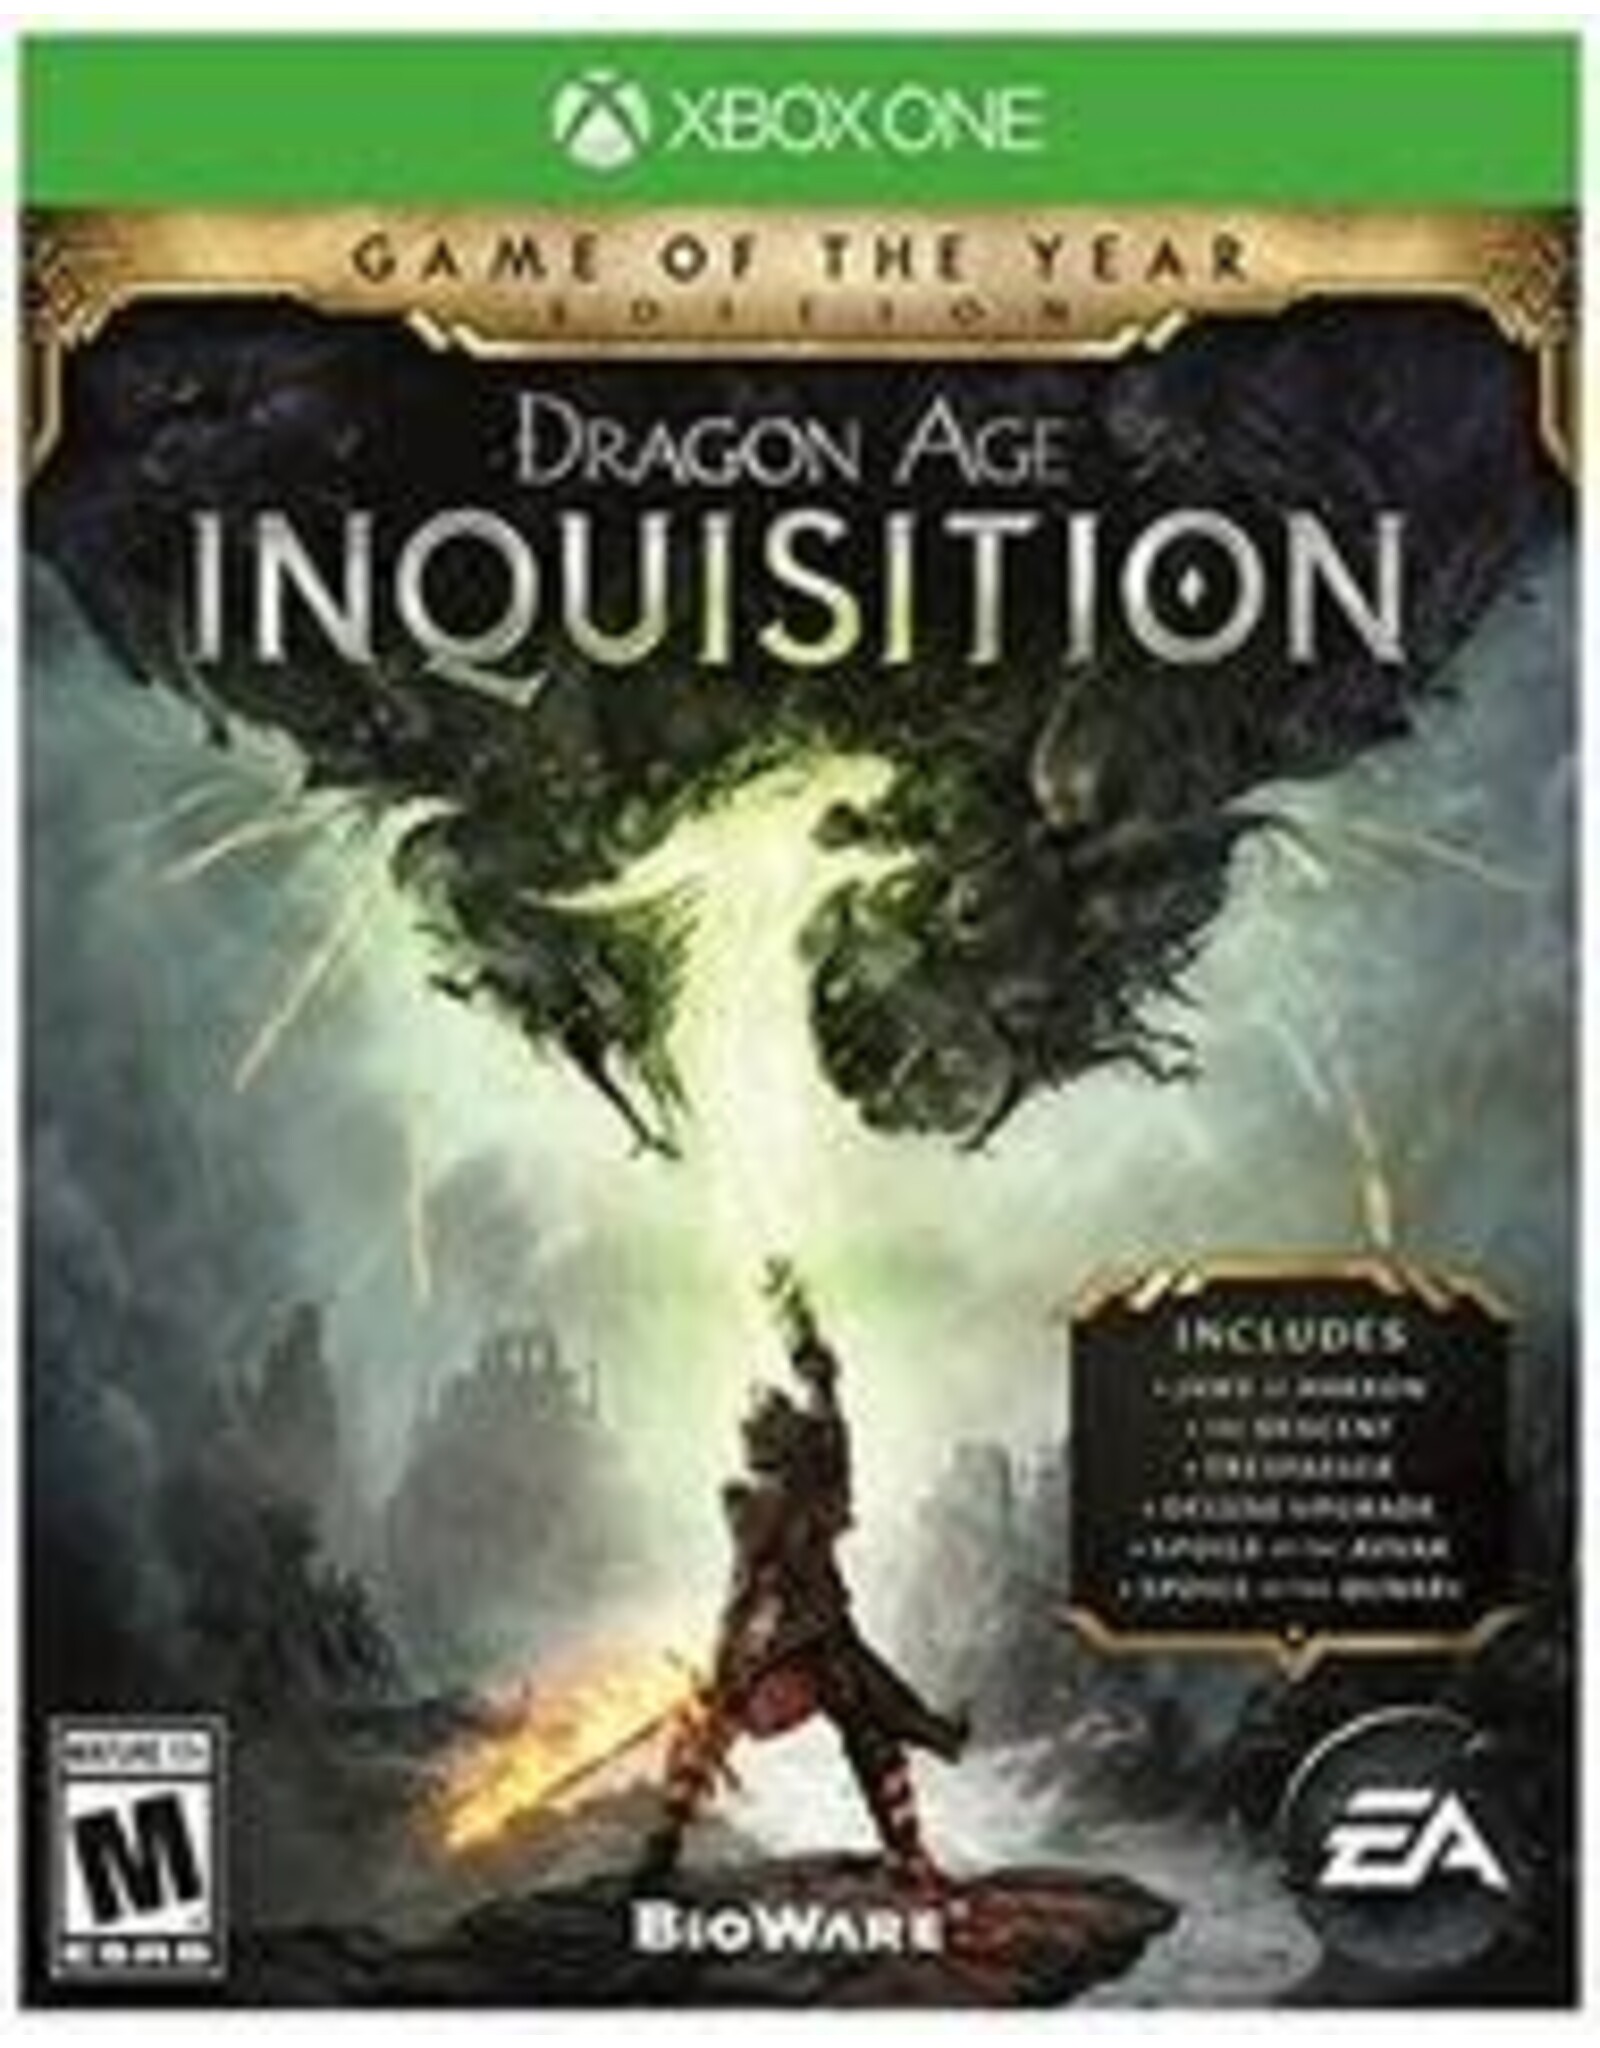 Xbox One Dragon Age: Inquisition Game of the Year (CiB, No DLC)